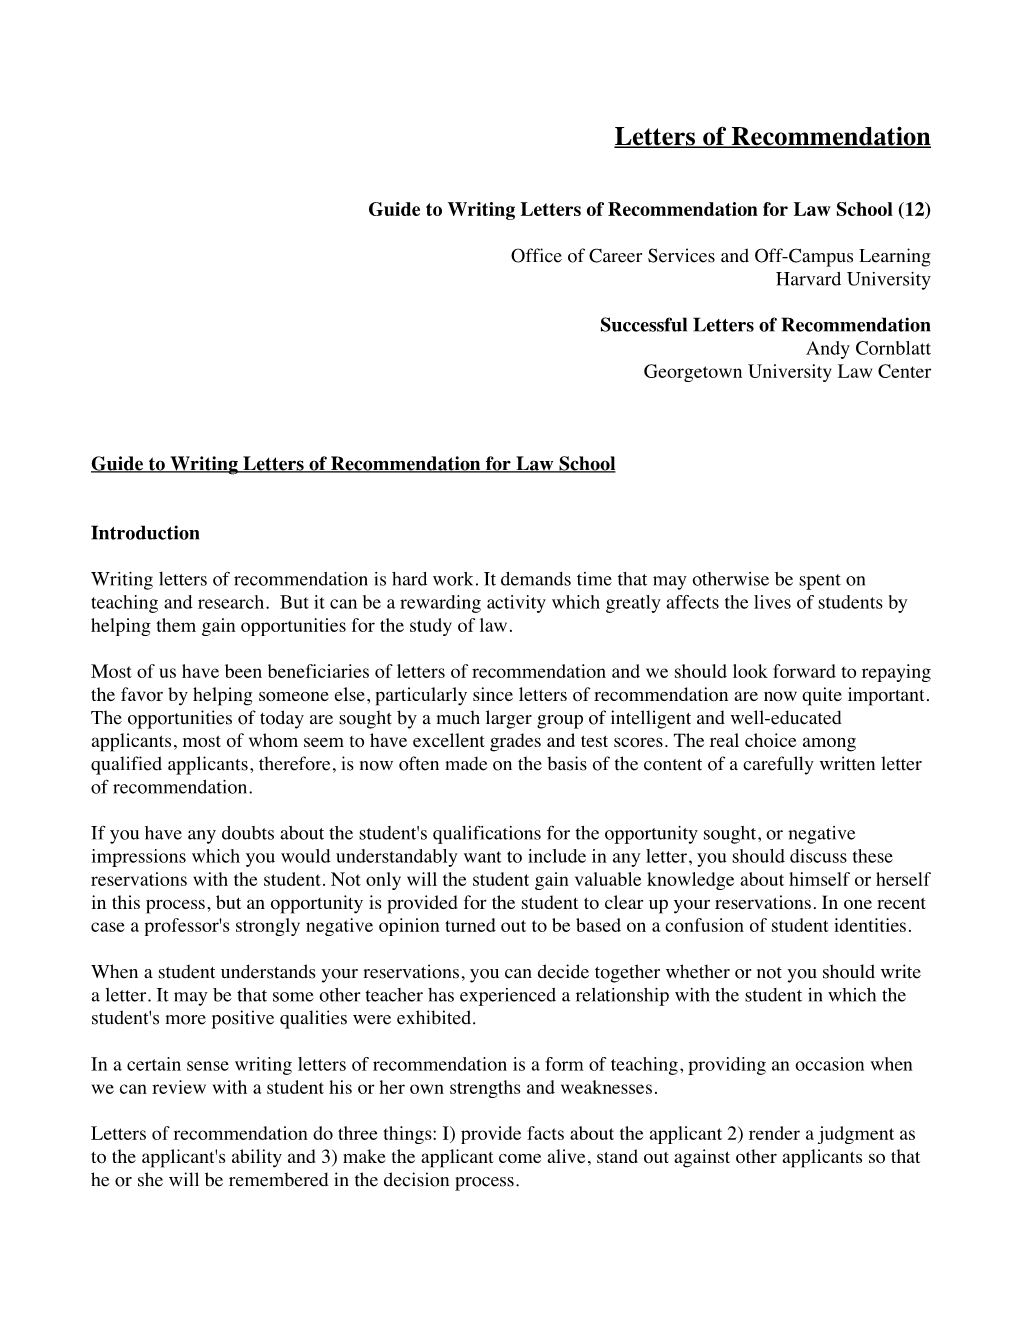 Guide to Writing Letters of Recommendation for Law School (12)